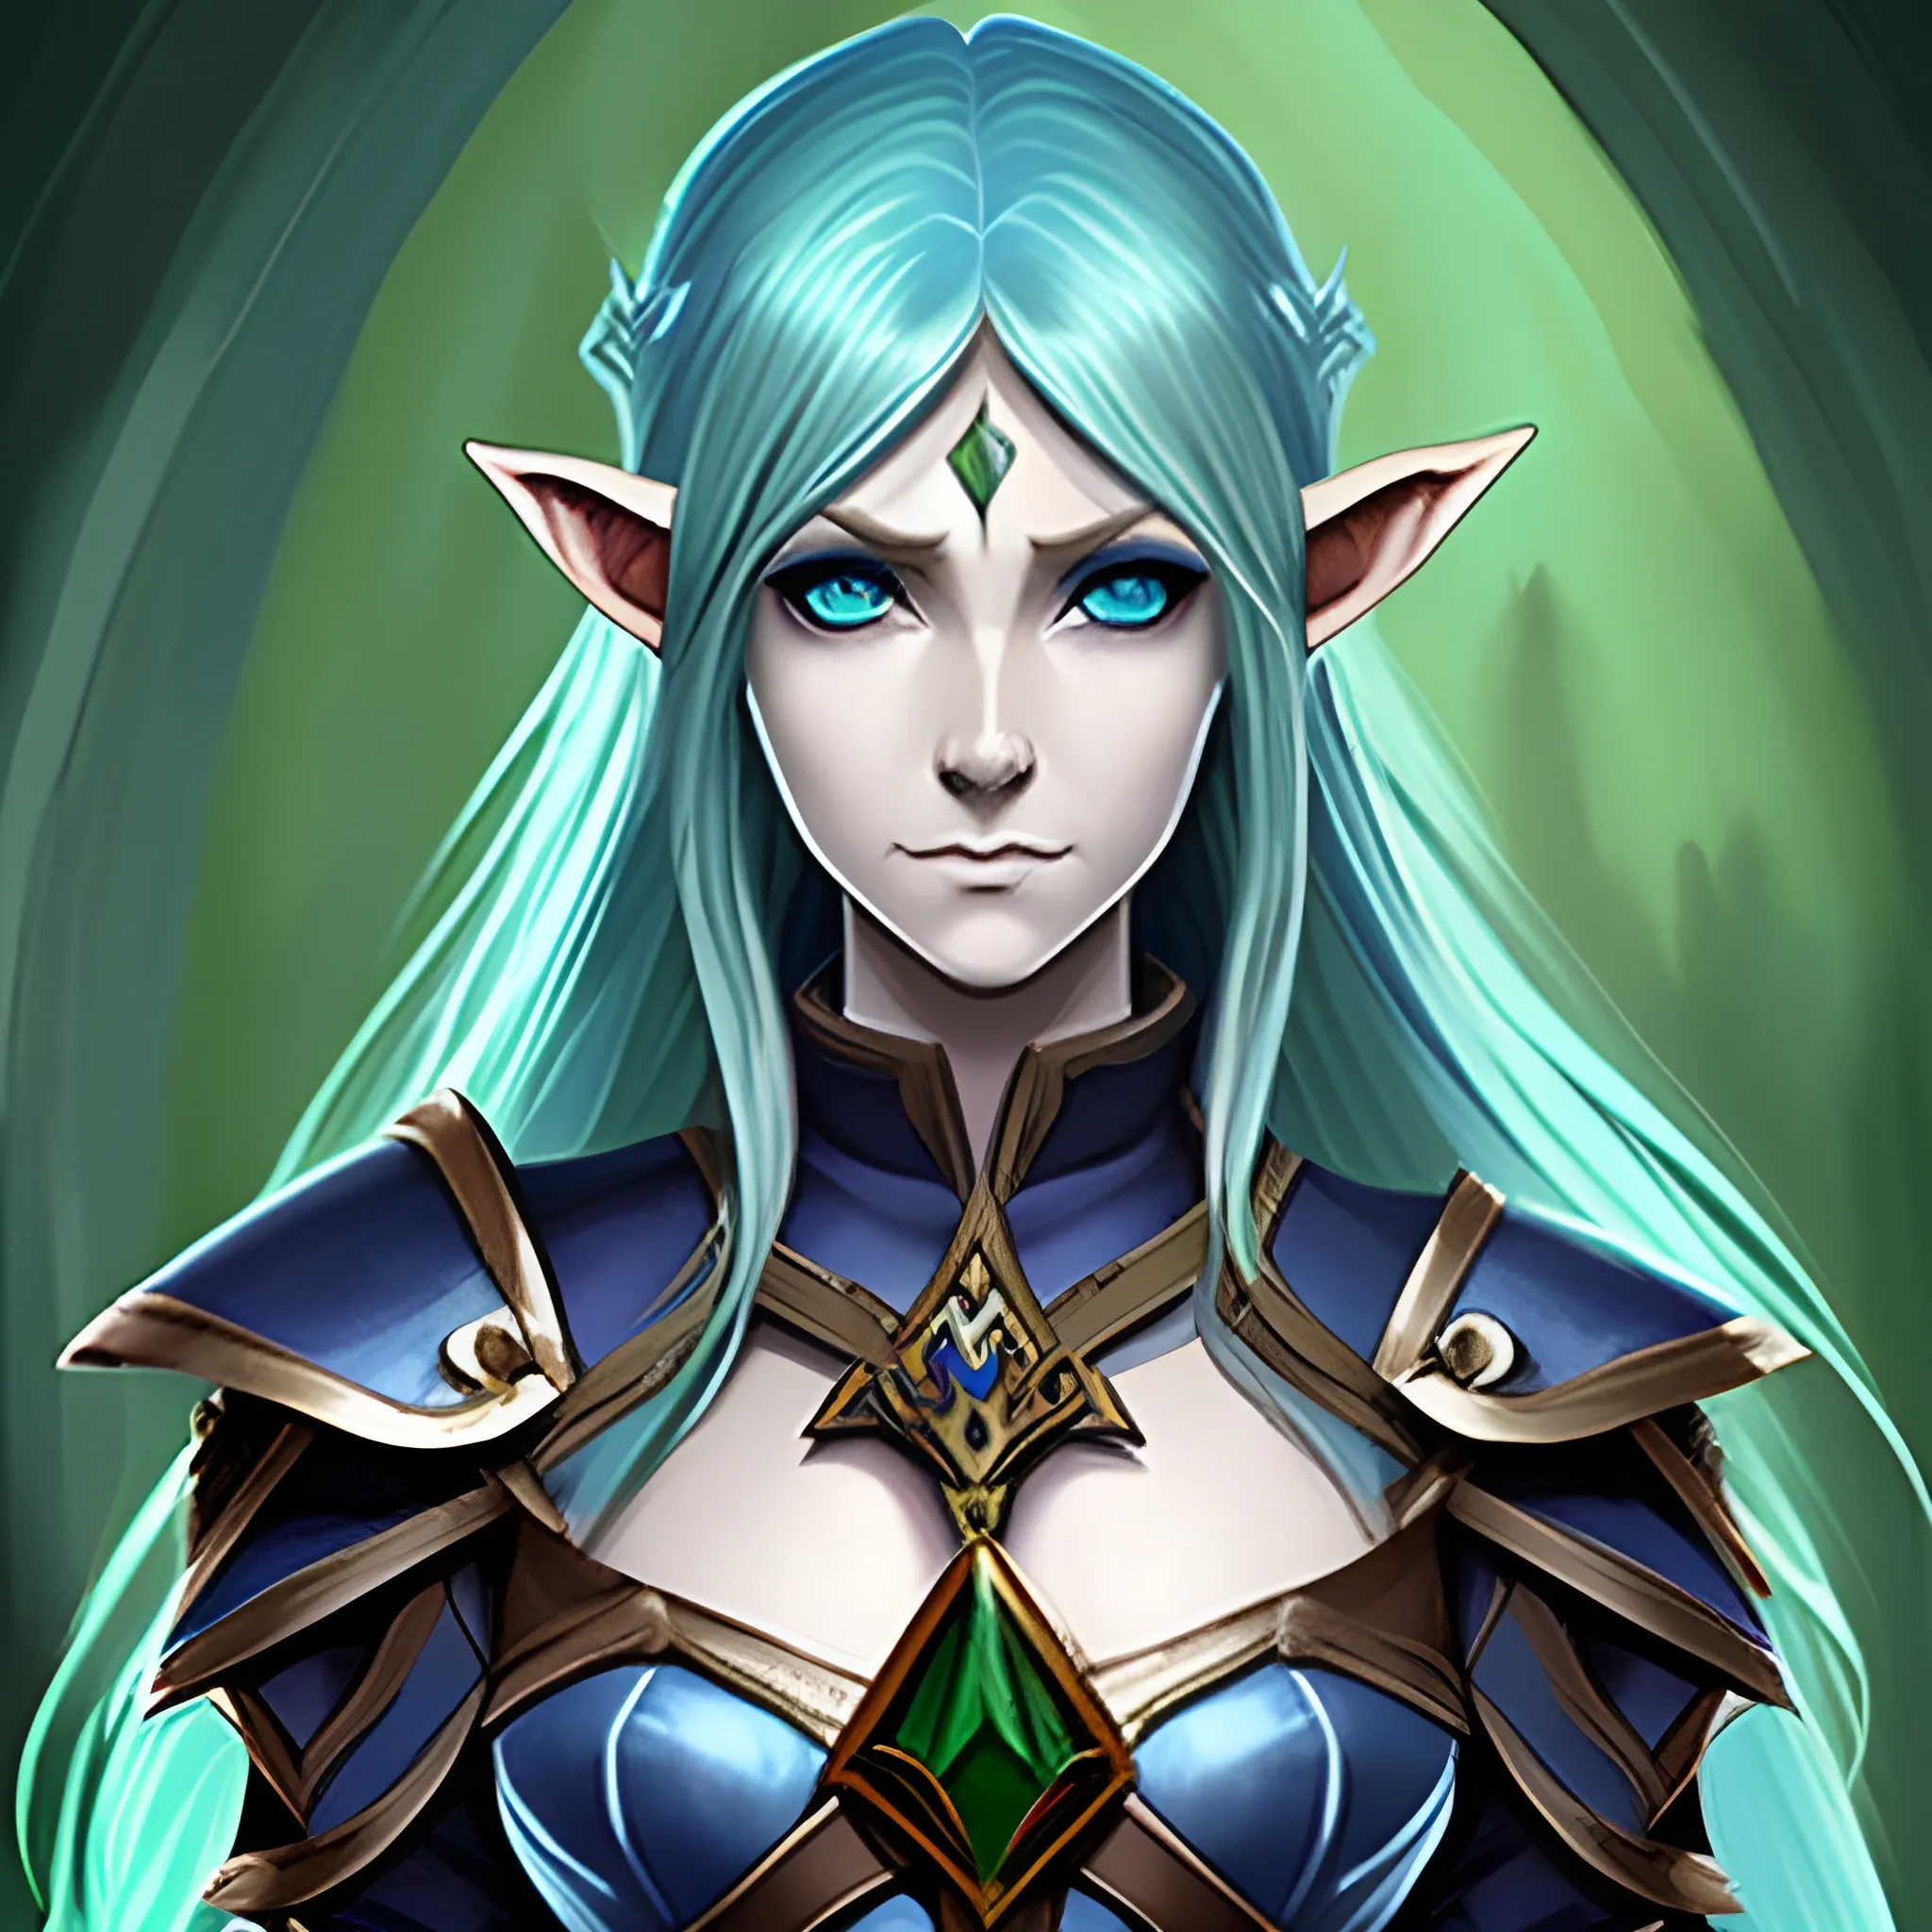 Create a dungeons and dragons character which is an Eladrin Elf Paladin Oath of Redemption with darkblue hair and green eyes, Water Color